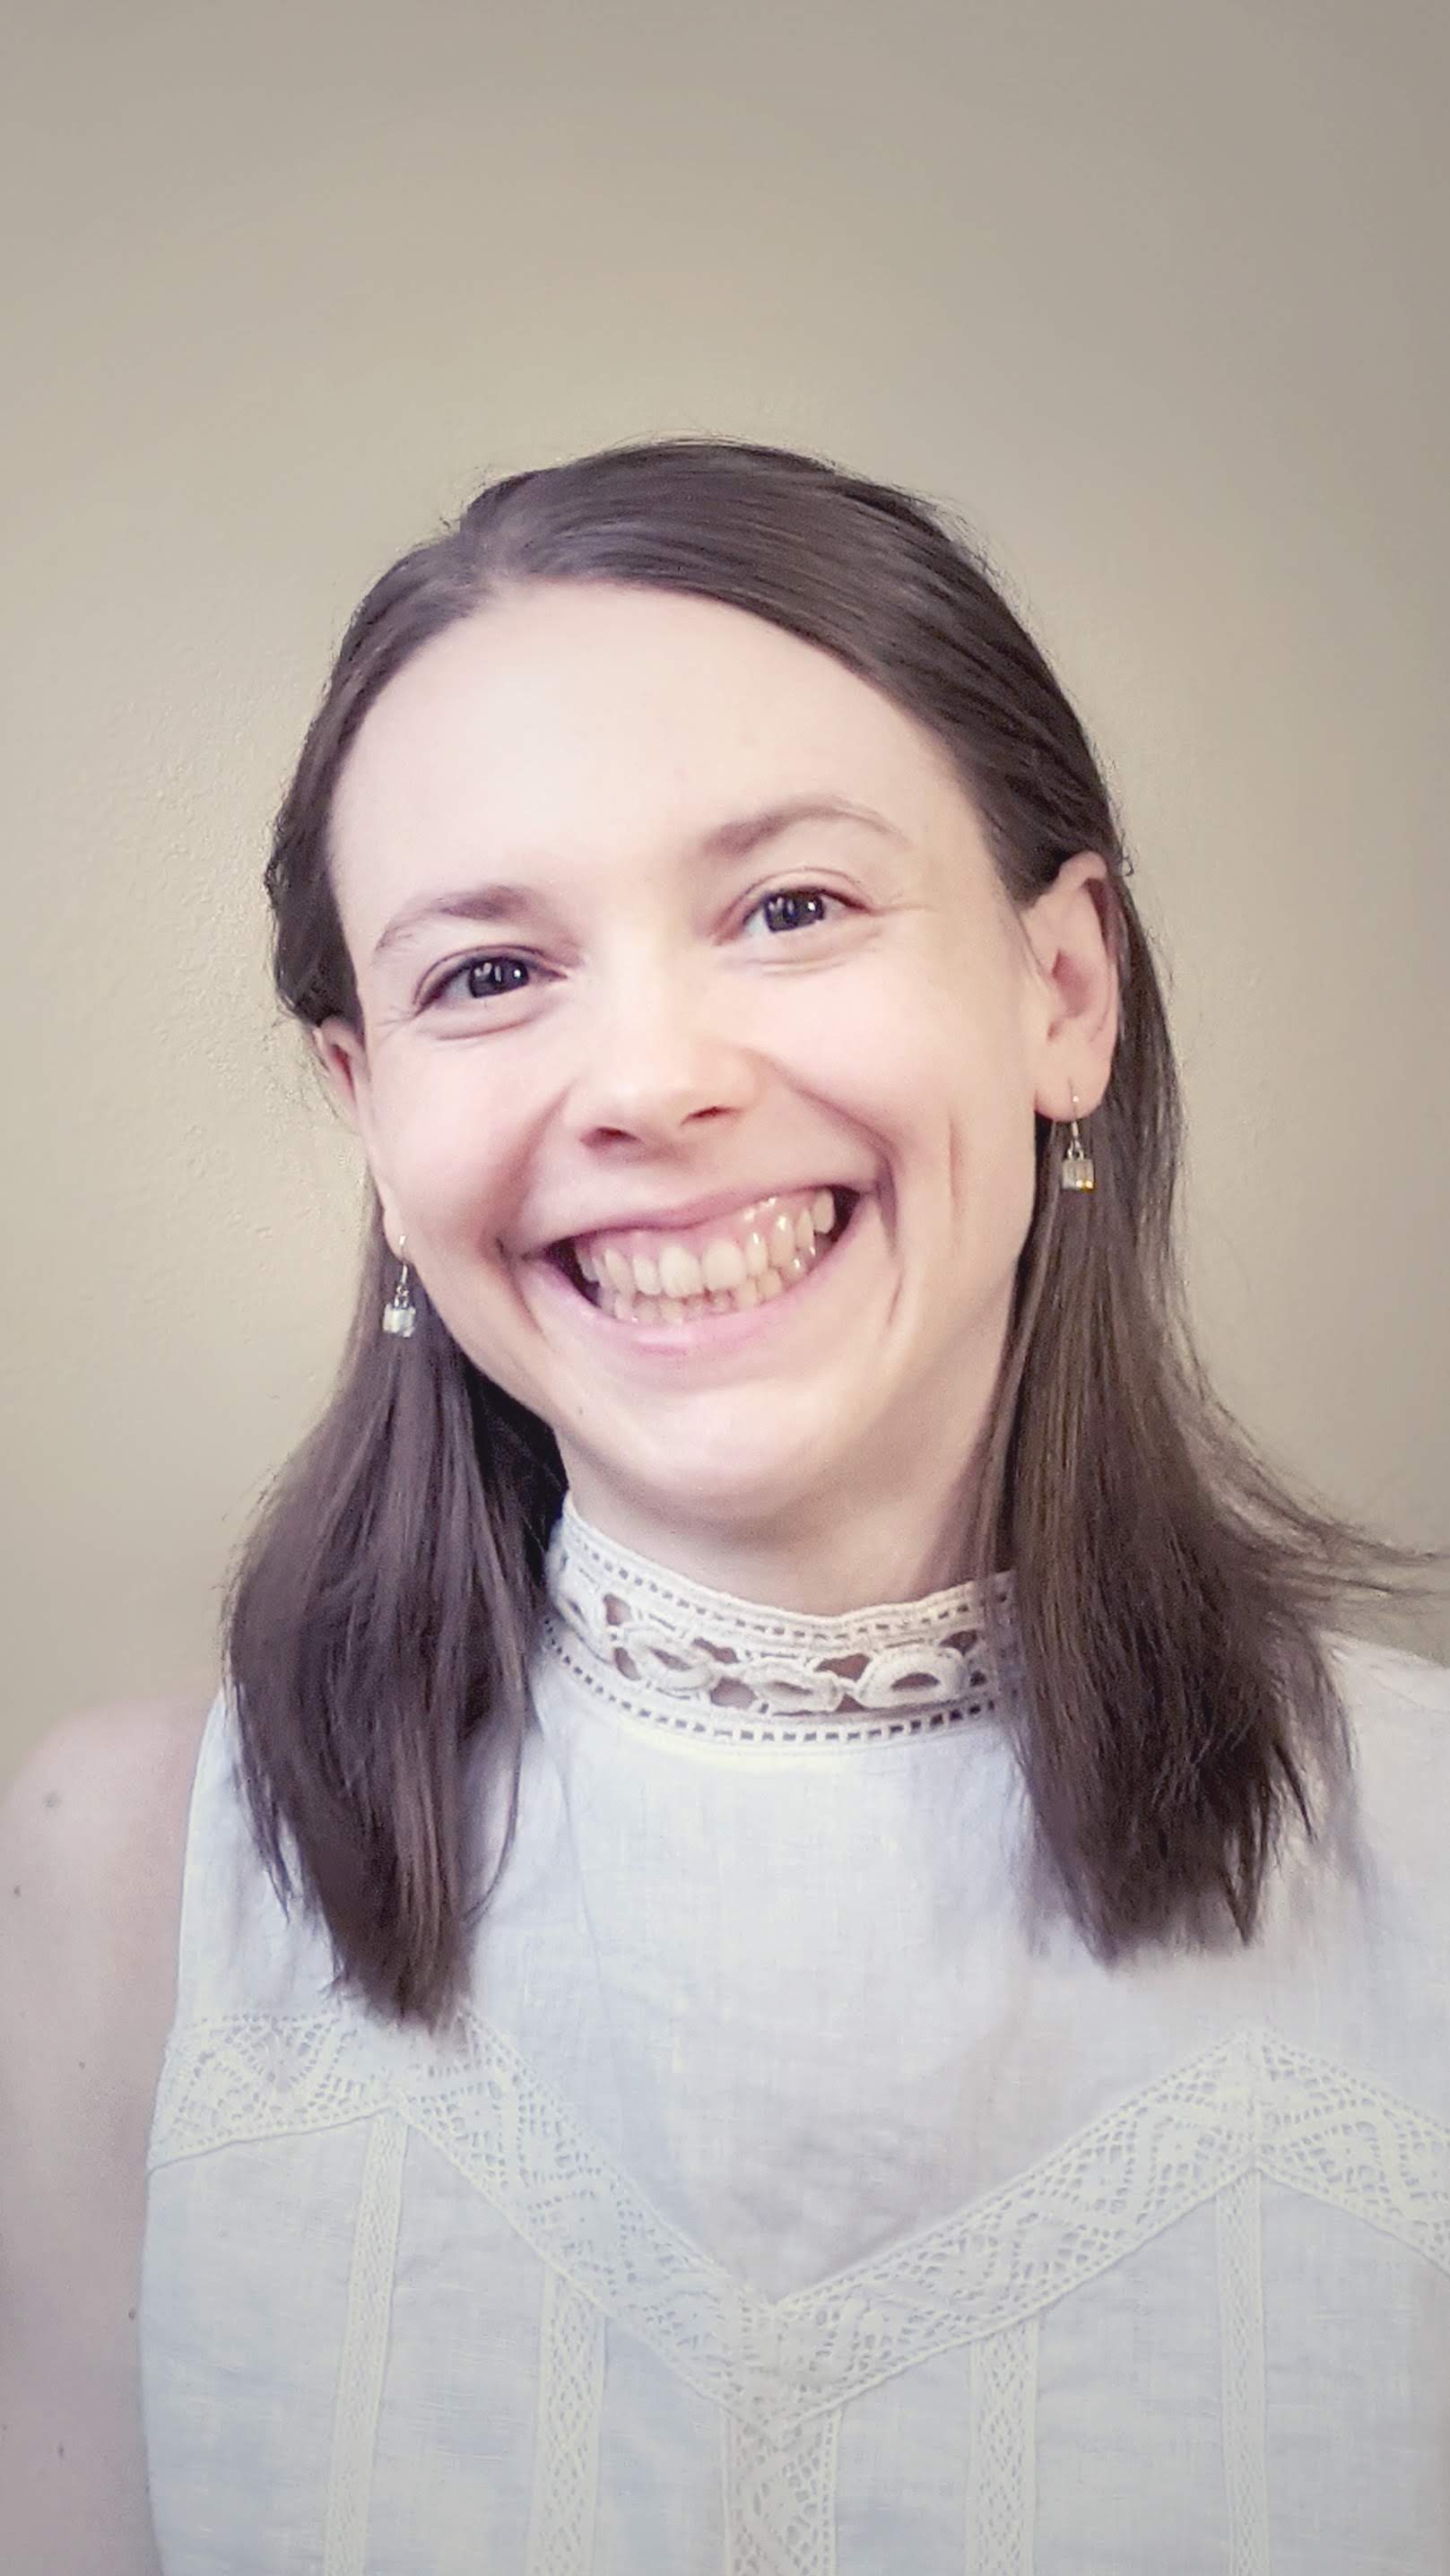 WWU outstanding graduate Student Pippa Hemsley, smiling with a gray background